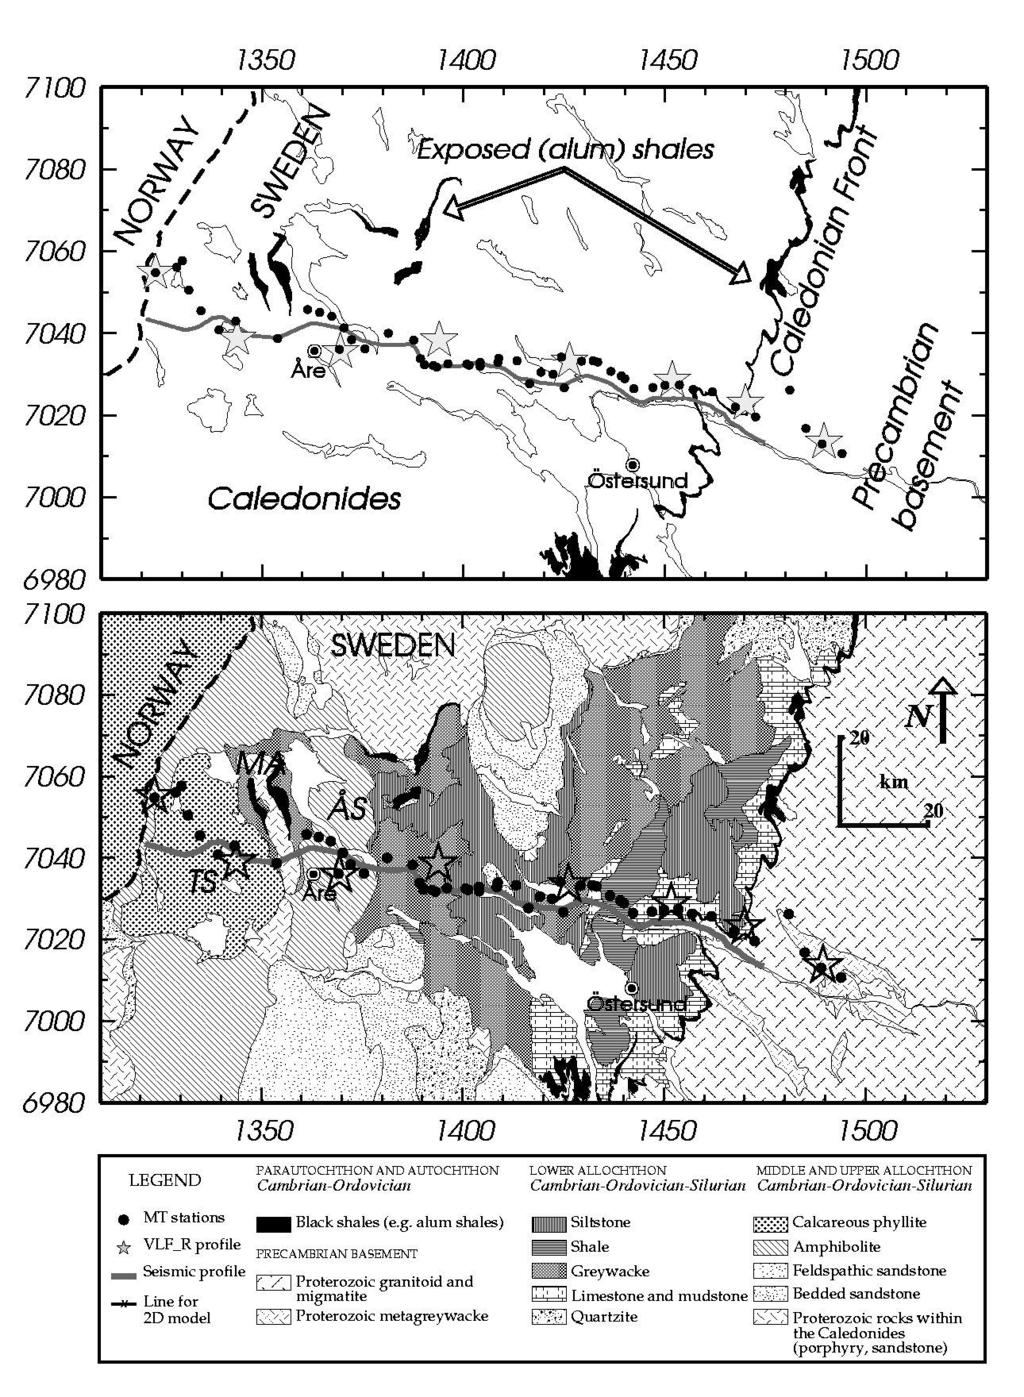 Figure 1. Lithological map of the central Scandinavian Caledonides in Sweden and location of the Jämtland magnetotelluric profile.